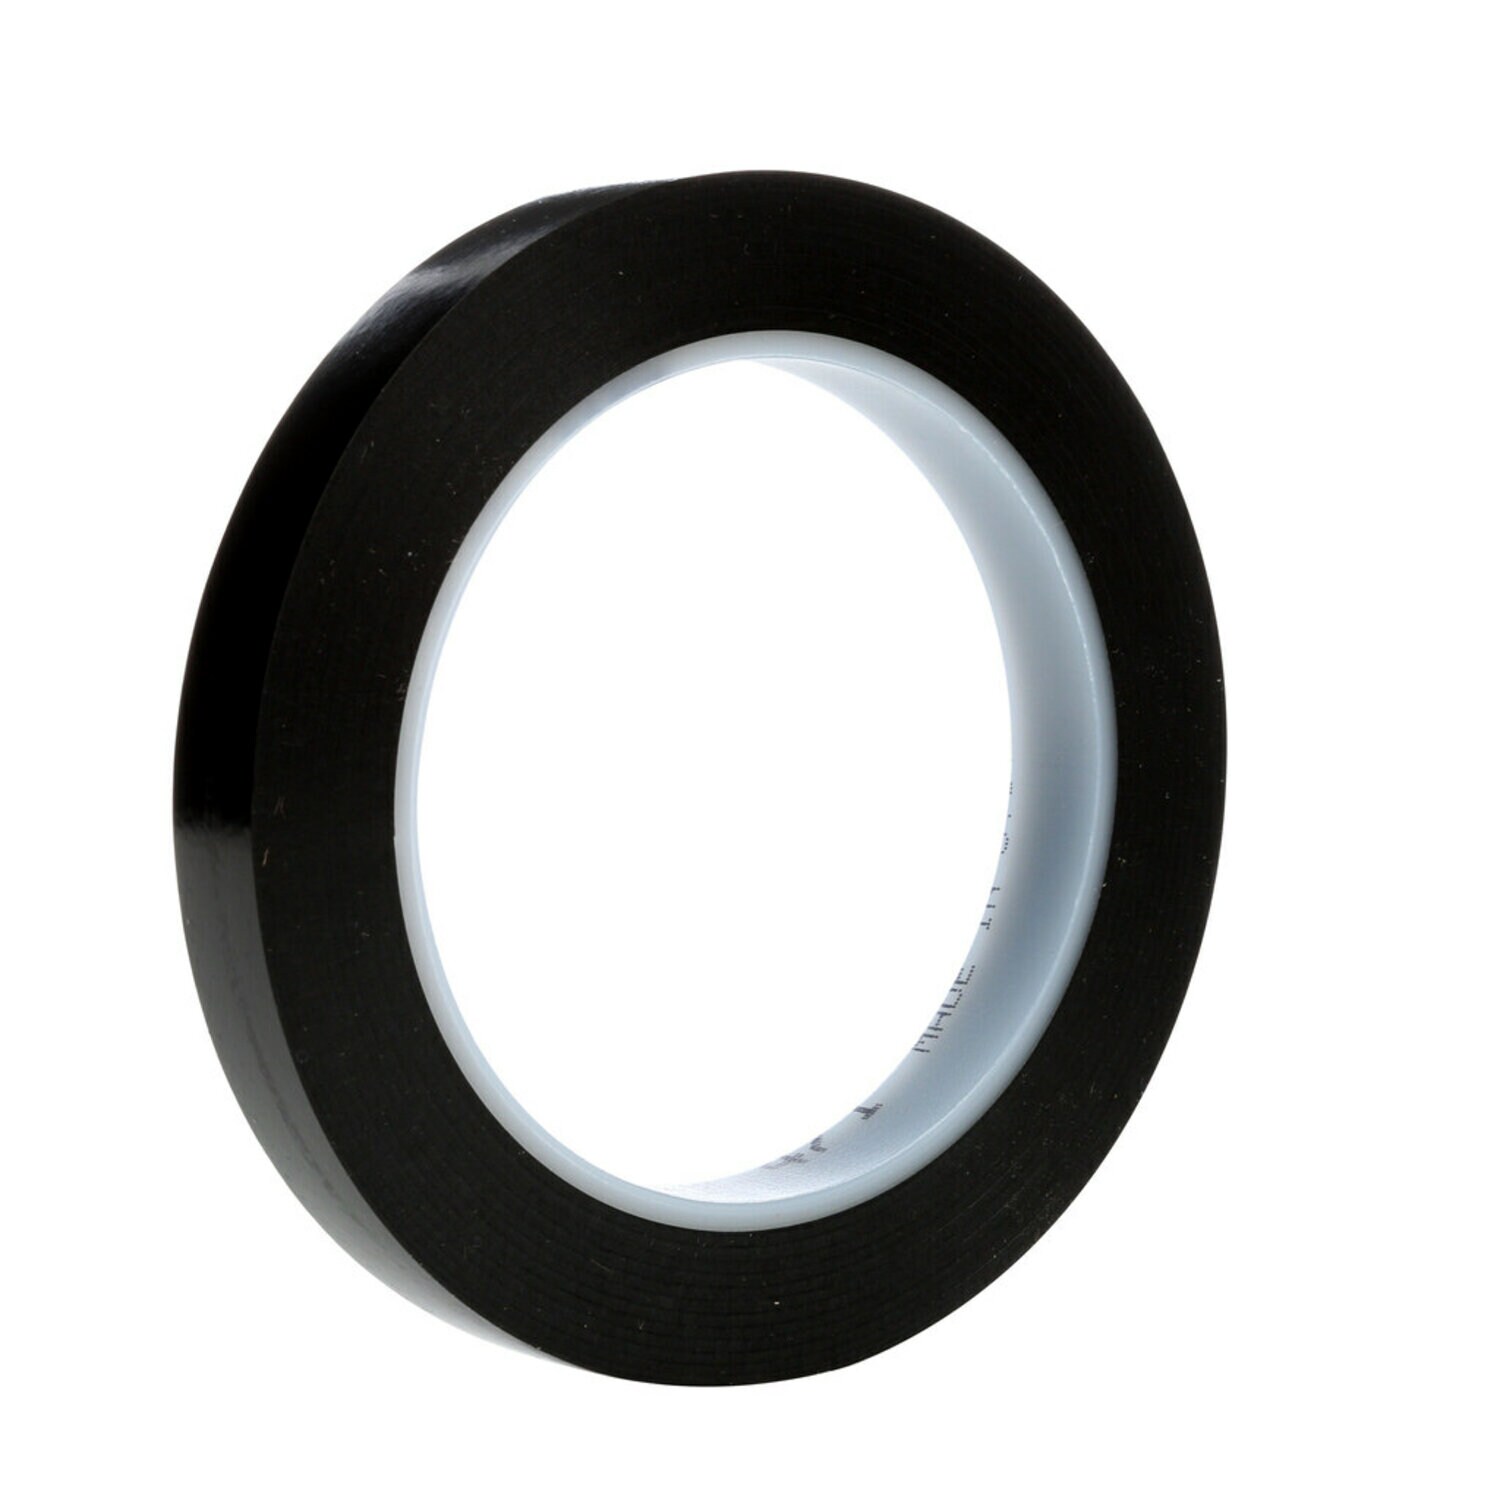 7100049360 - 3M Vinyl Tape 471, Black, 3/8 in x 36 yd, 5.2 mil, 96 rolls per case,
Individually Wrapped Conveniently Packaged